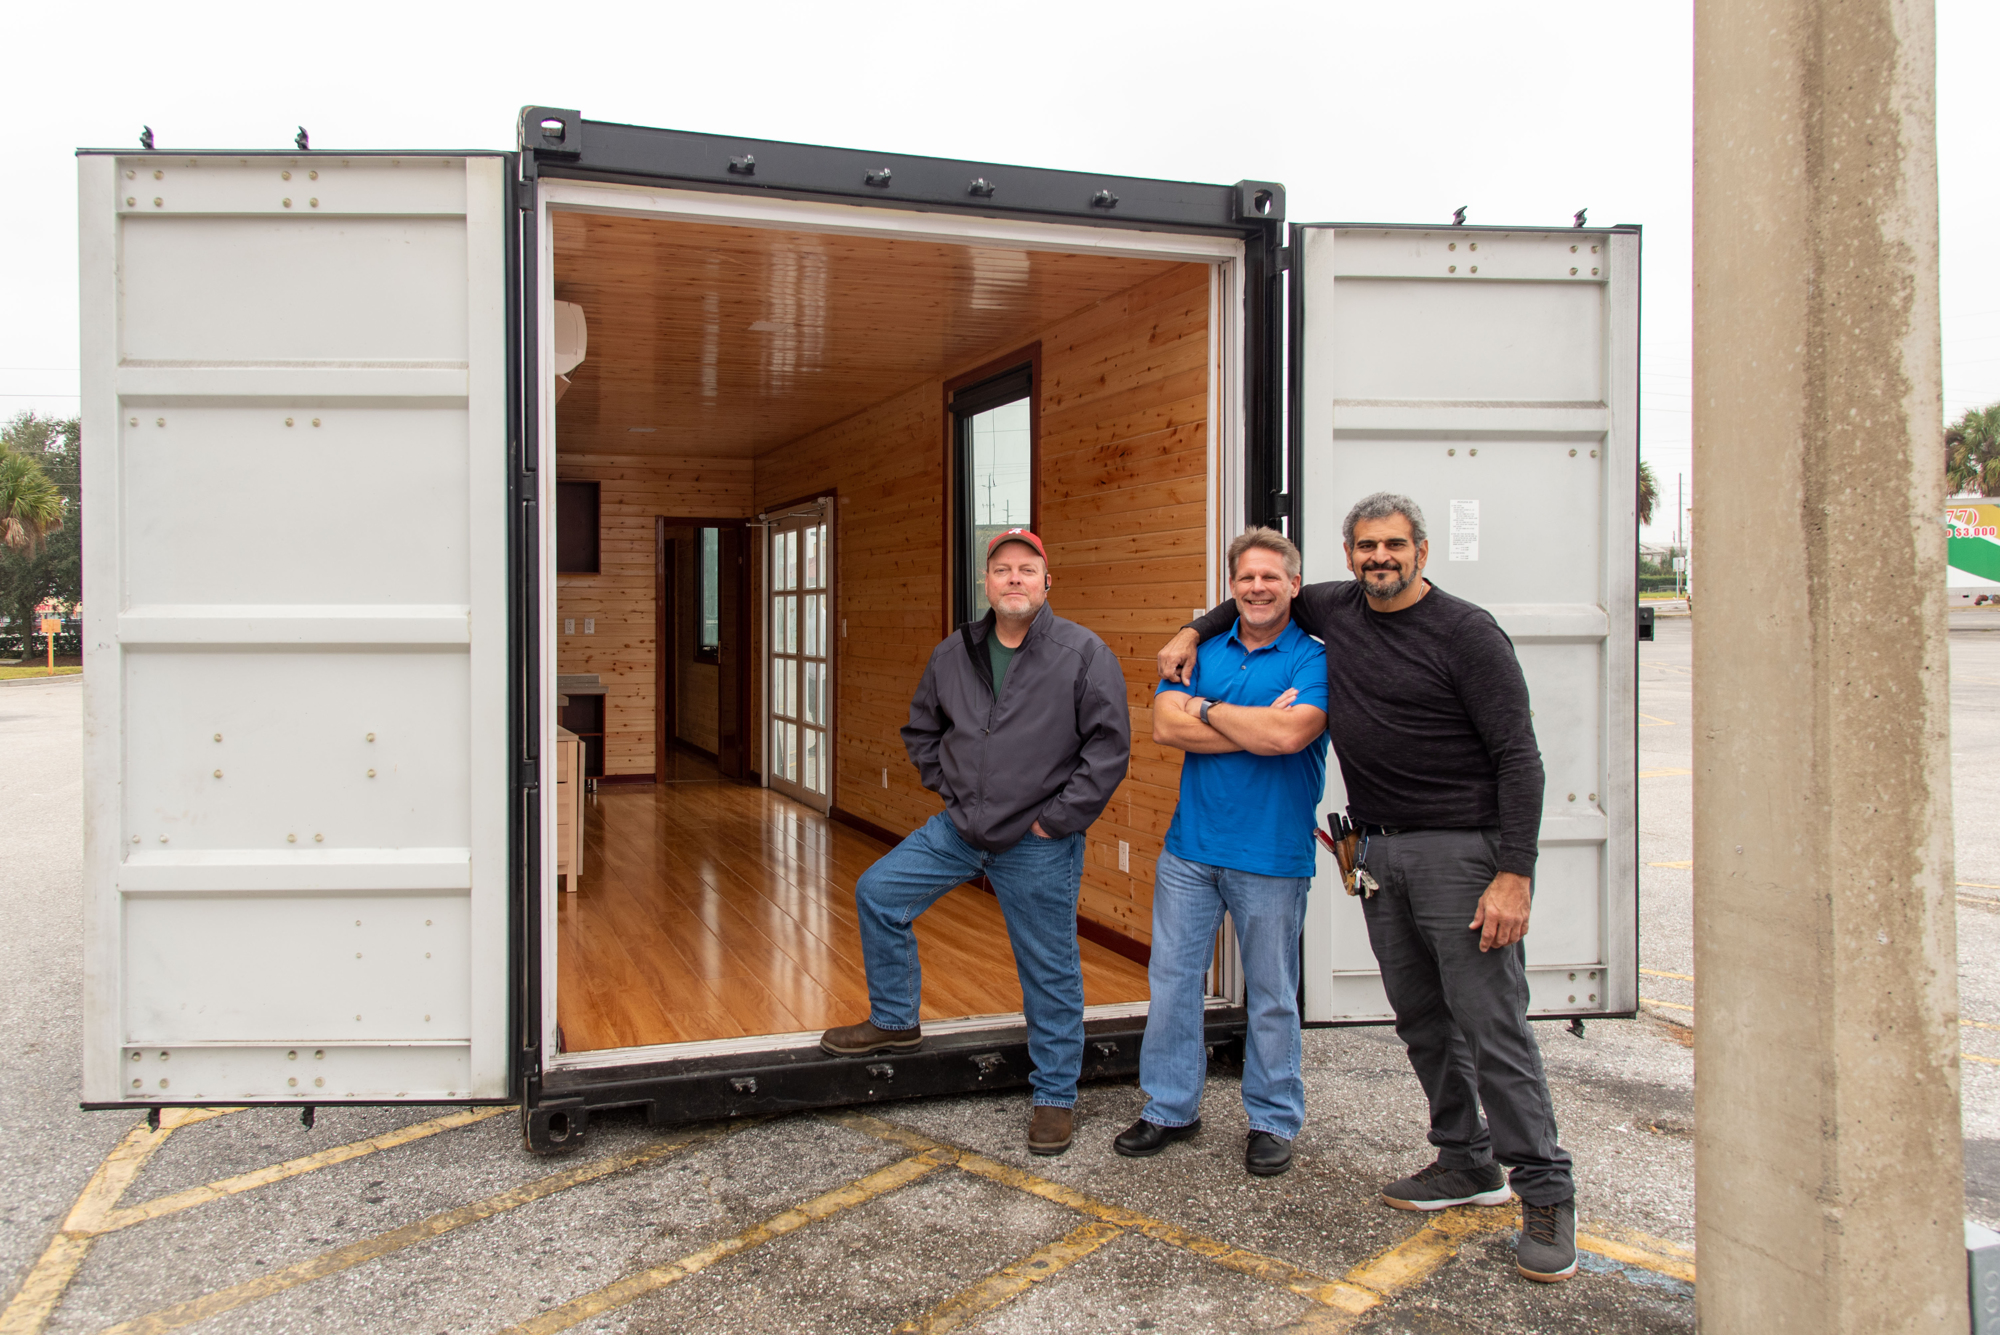 Lori Sax. Danny Nelms, Joe Davis and Mario Cimmino are with Innovar Homes, which is building shipping container homes out of a factory in Hardee County.